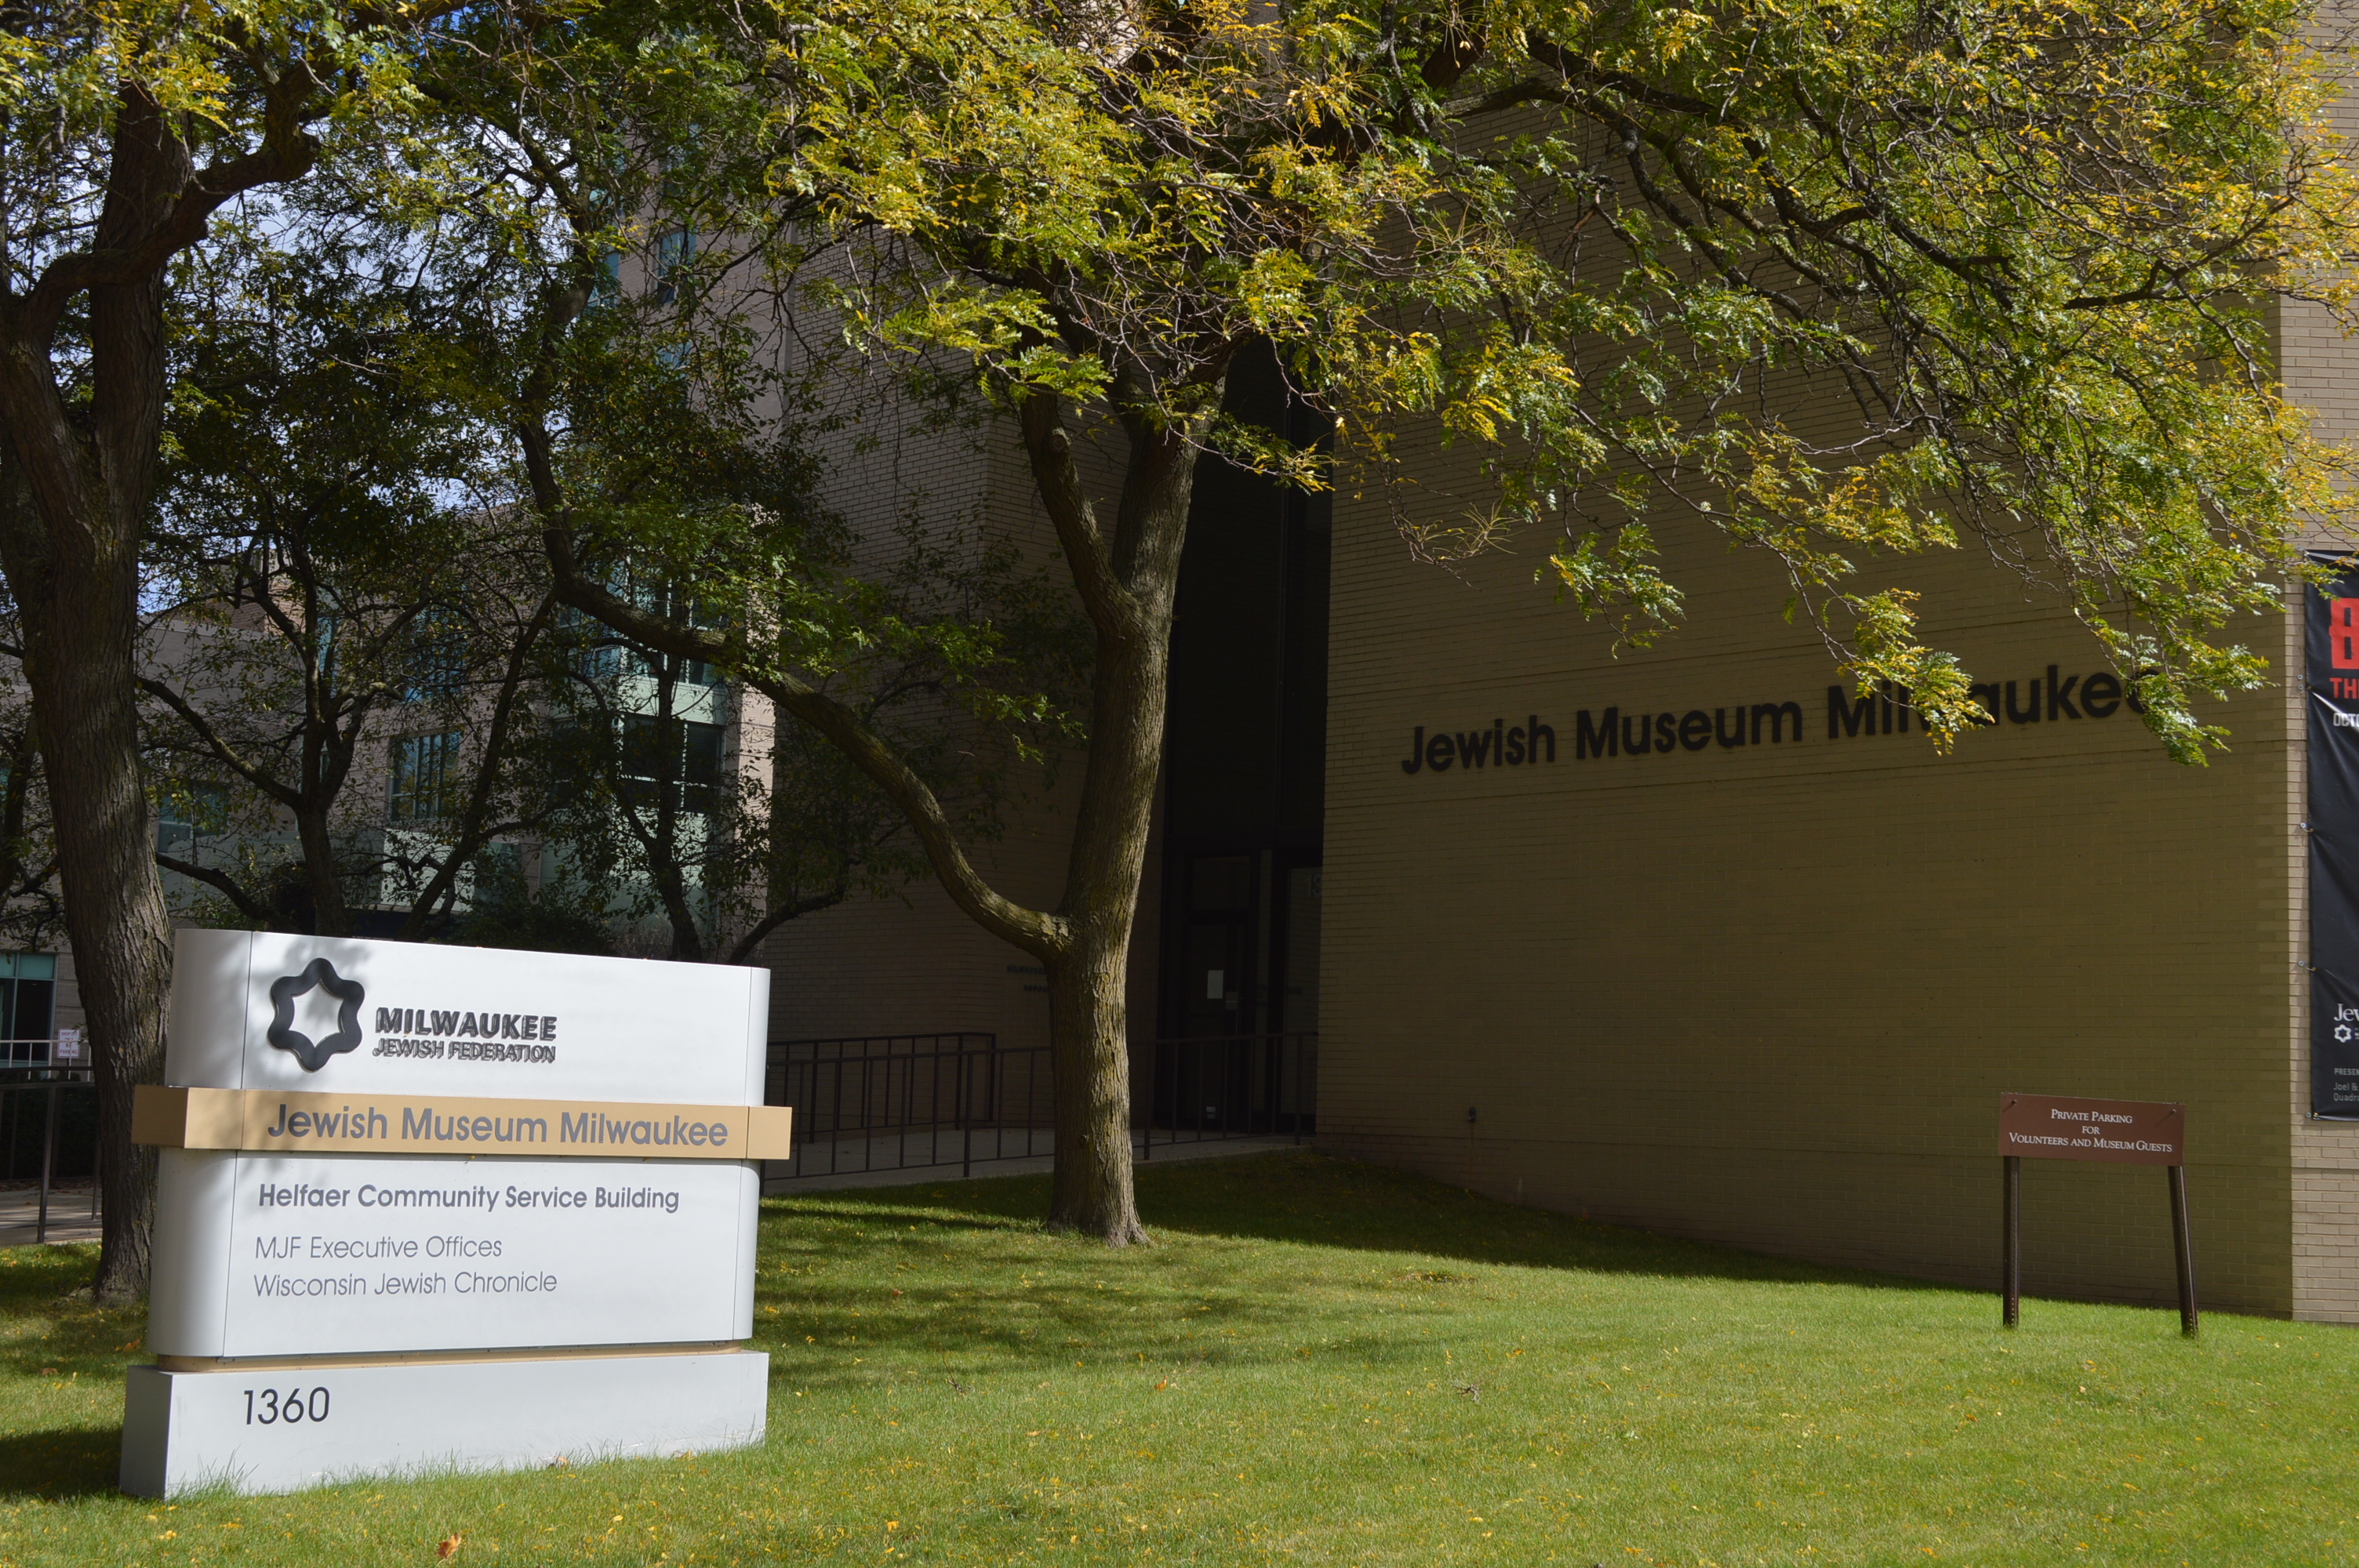 The Jewish Museum Milwaukee is located on Prospect Avenue just north of the city's downtown. It is committed to preserving and exploring the history of the Jewish community in Southeastern Wisconsin.